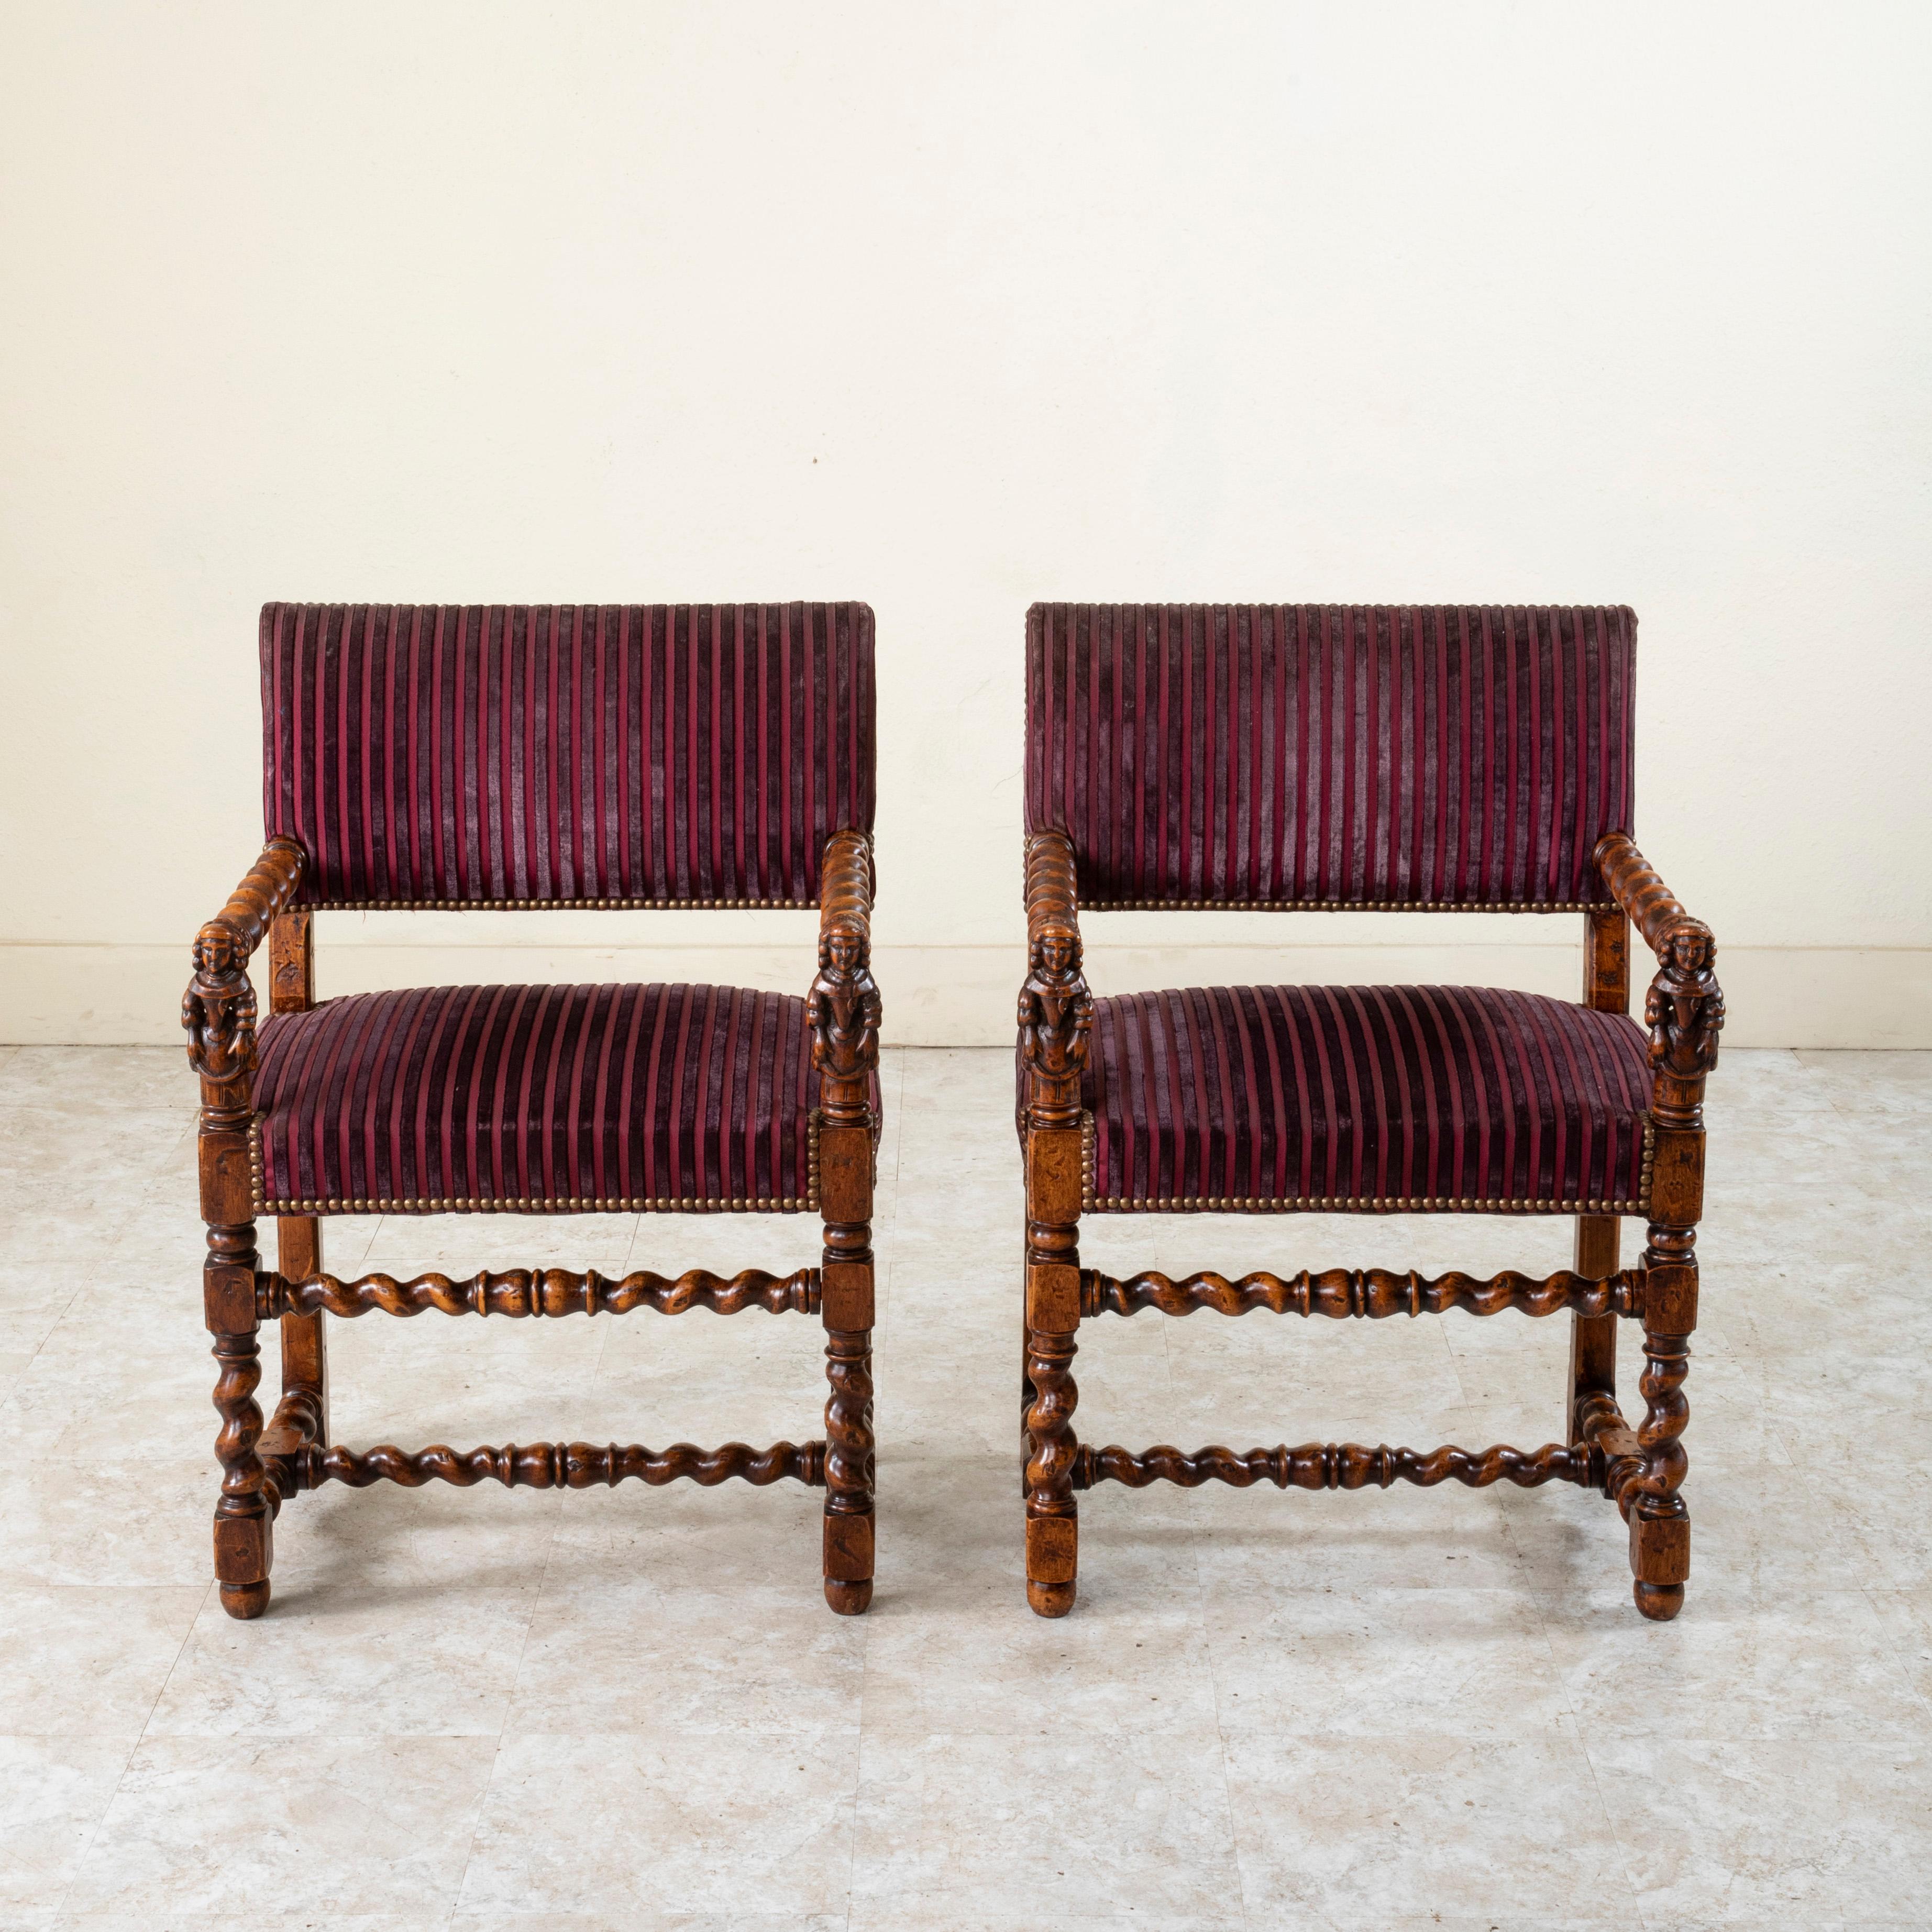 This pair of late nineteenth century French Louis XIII style armchairs features hand carved Renaissance female figures that support the hand turned barley twist armrests. The seats rest on classic barley twist legs at the front that join the squared